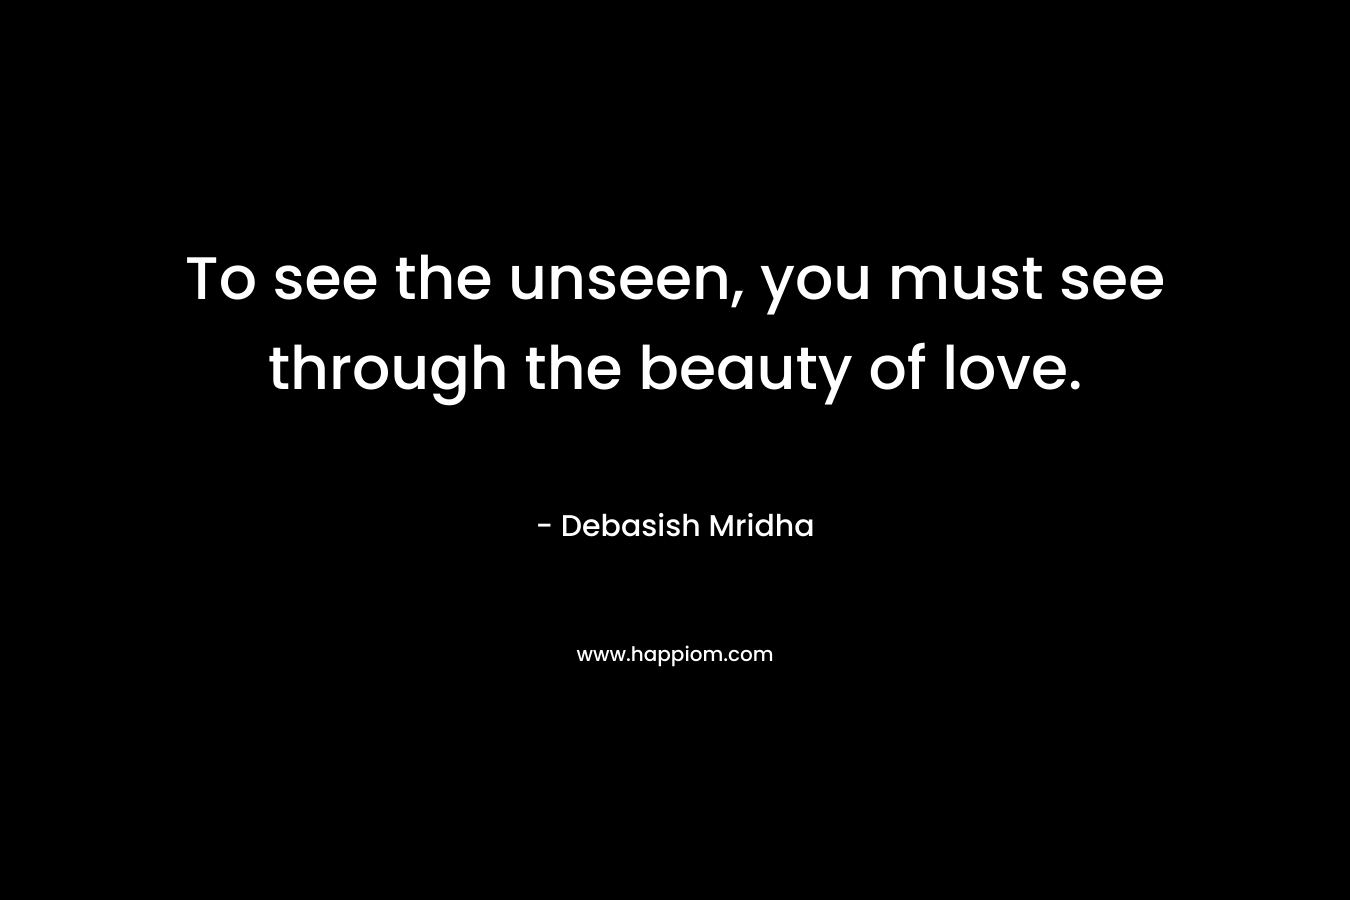 To see the unseen, you must see through the beauty of love.